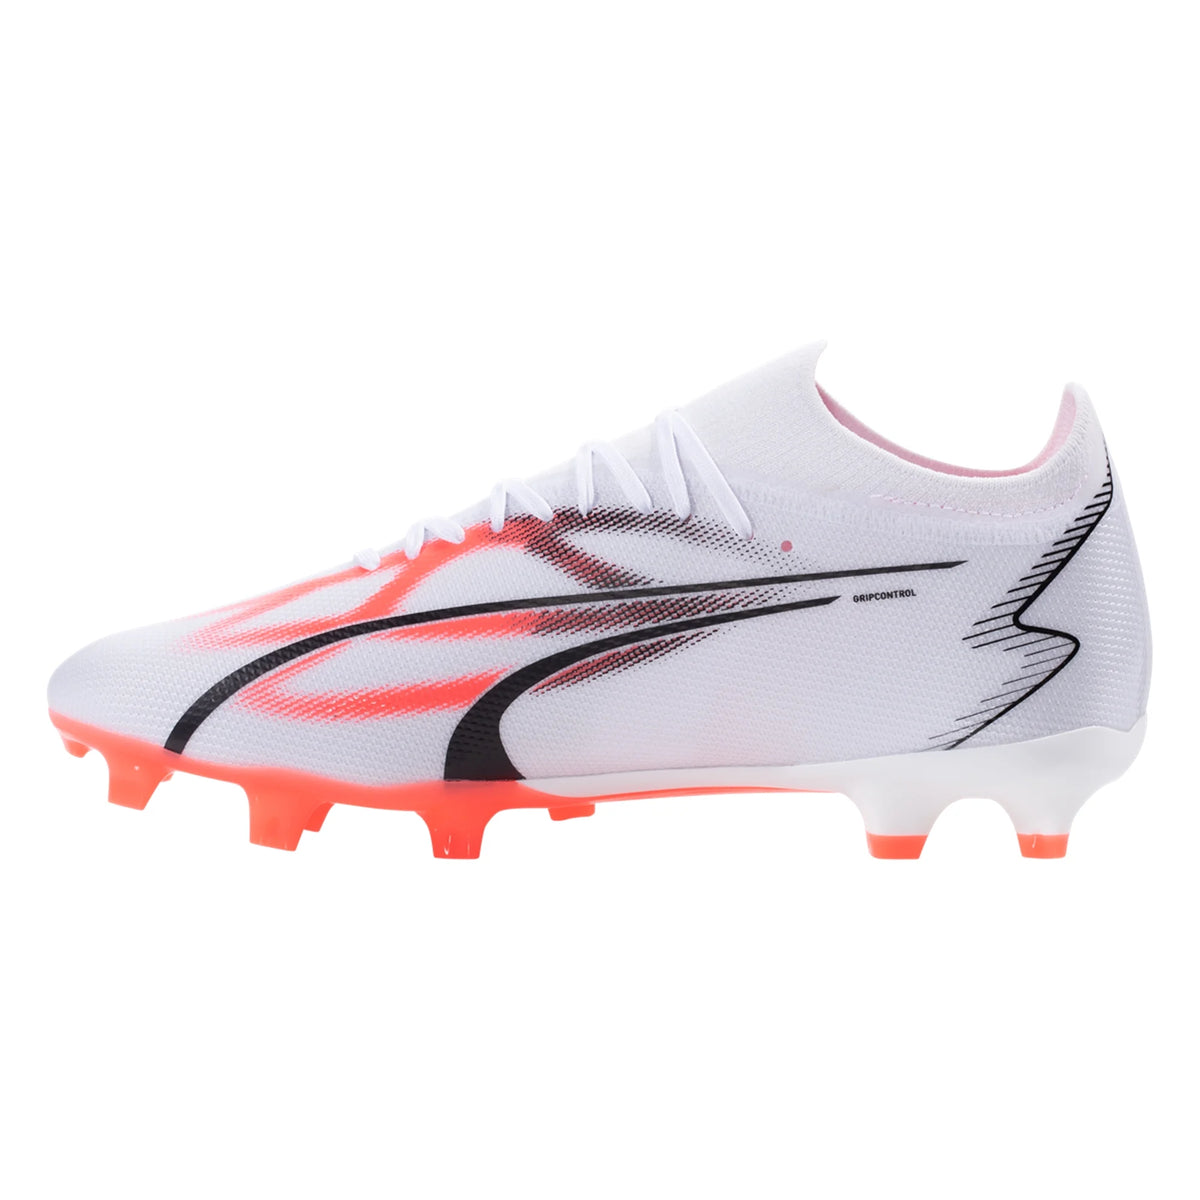 White/Black/Fire – USA Firm FG/AG Zone 107347-01 Ultra Match Cleat Orchid Soccer - Soccer Ground Puma